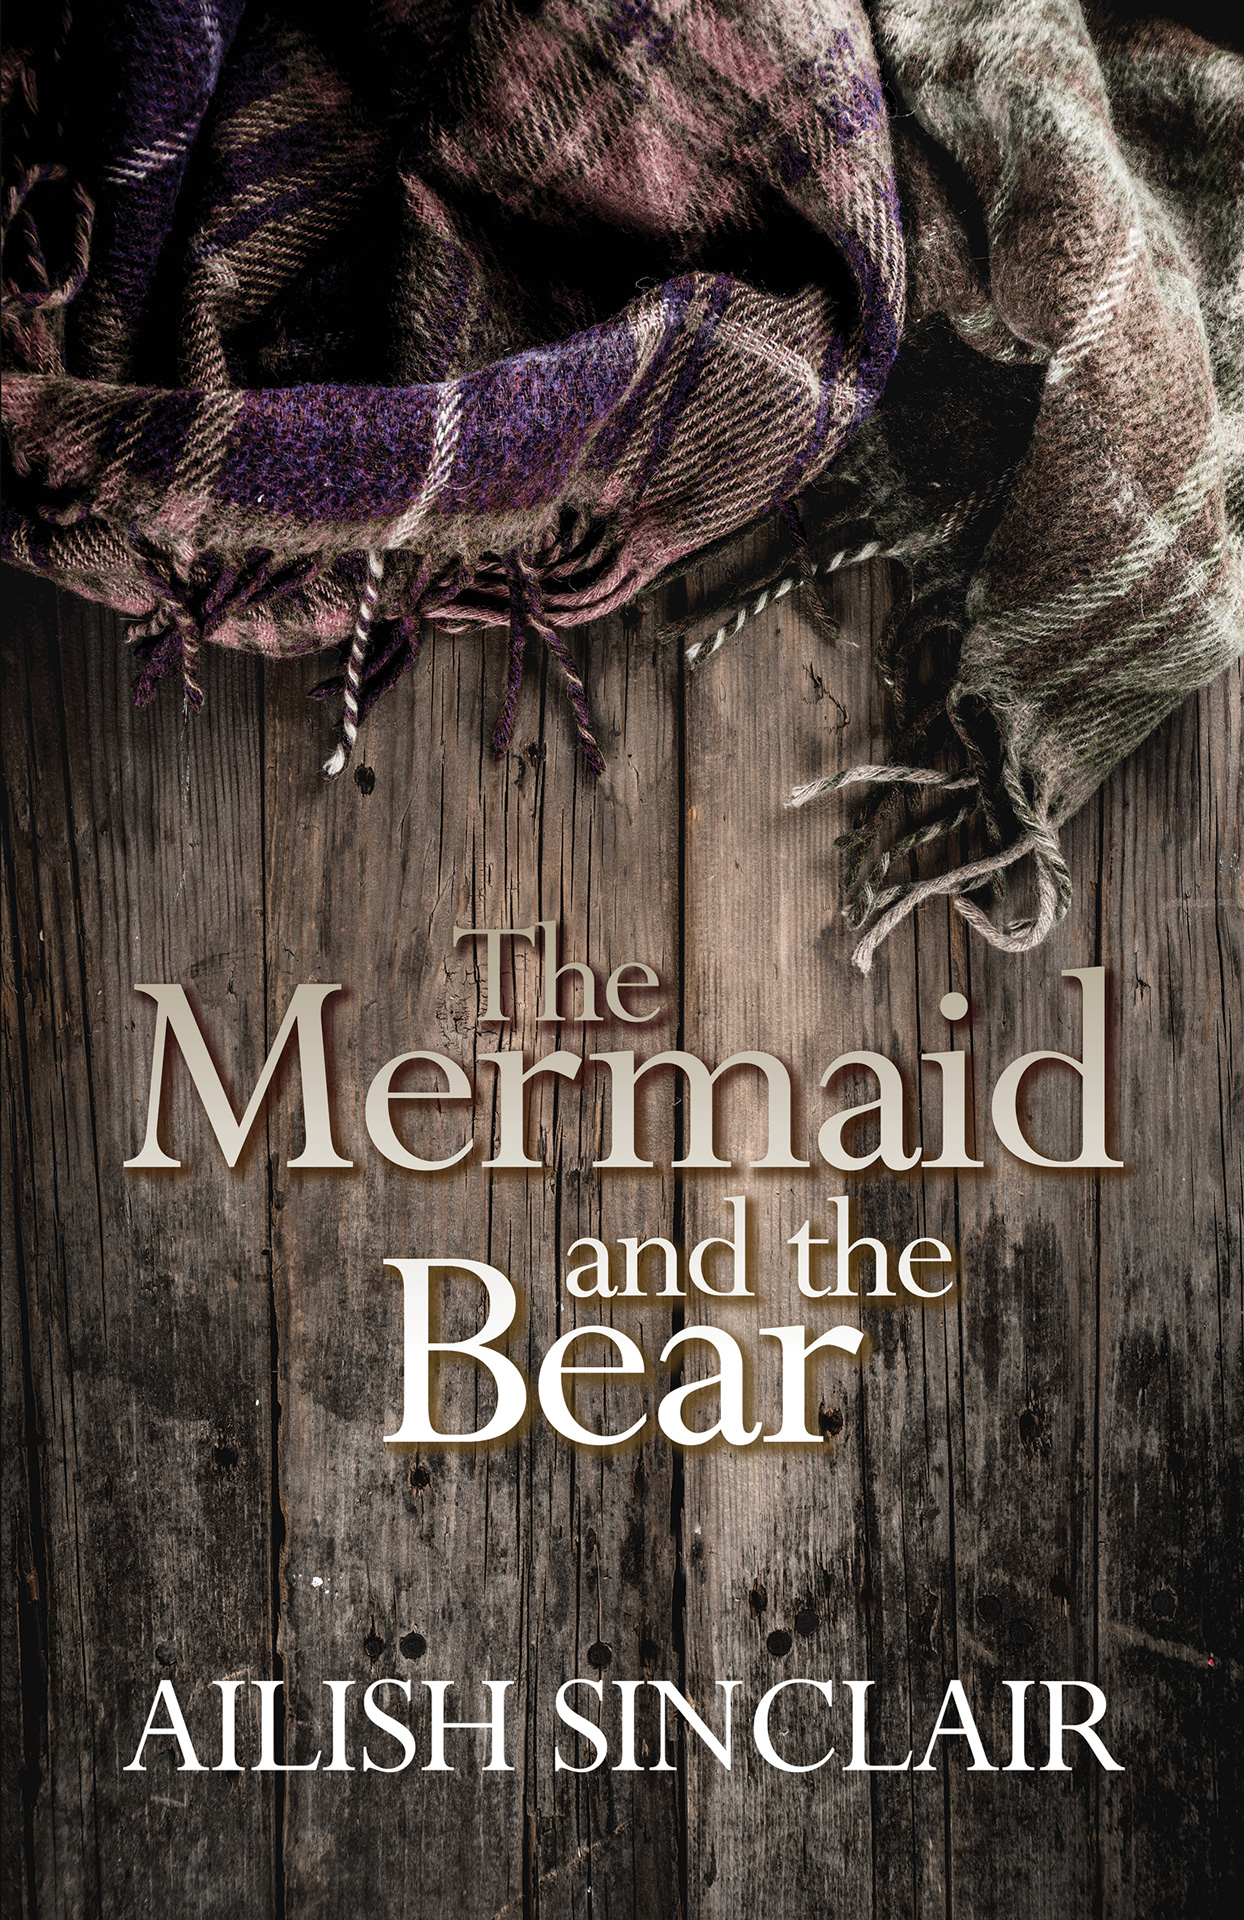 Cover image of The Mermaid and The Bear by Ailish Sinclair.